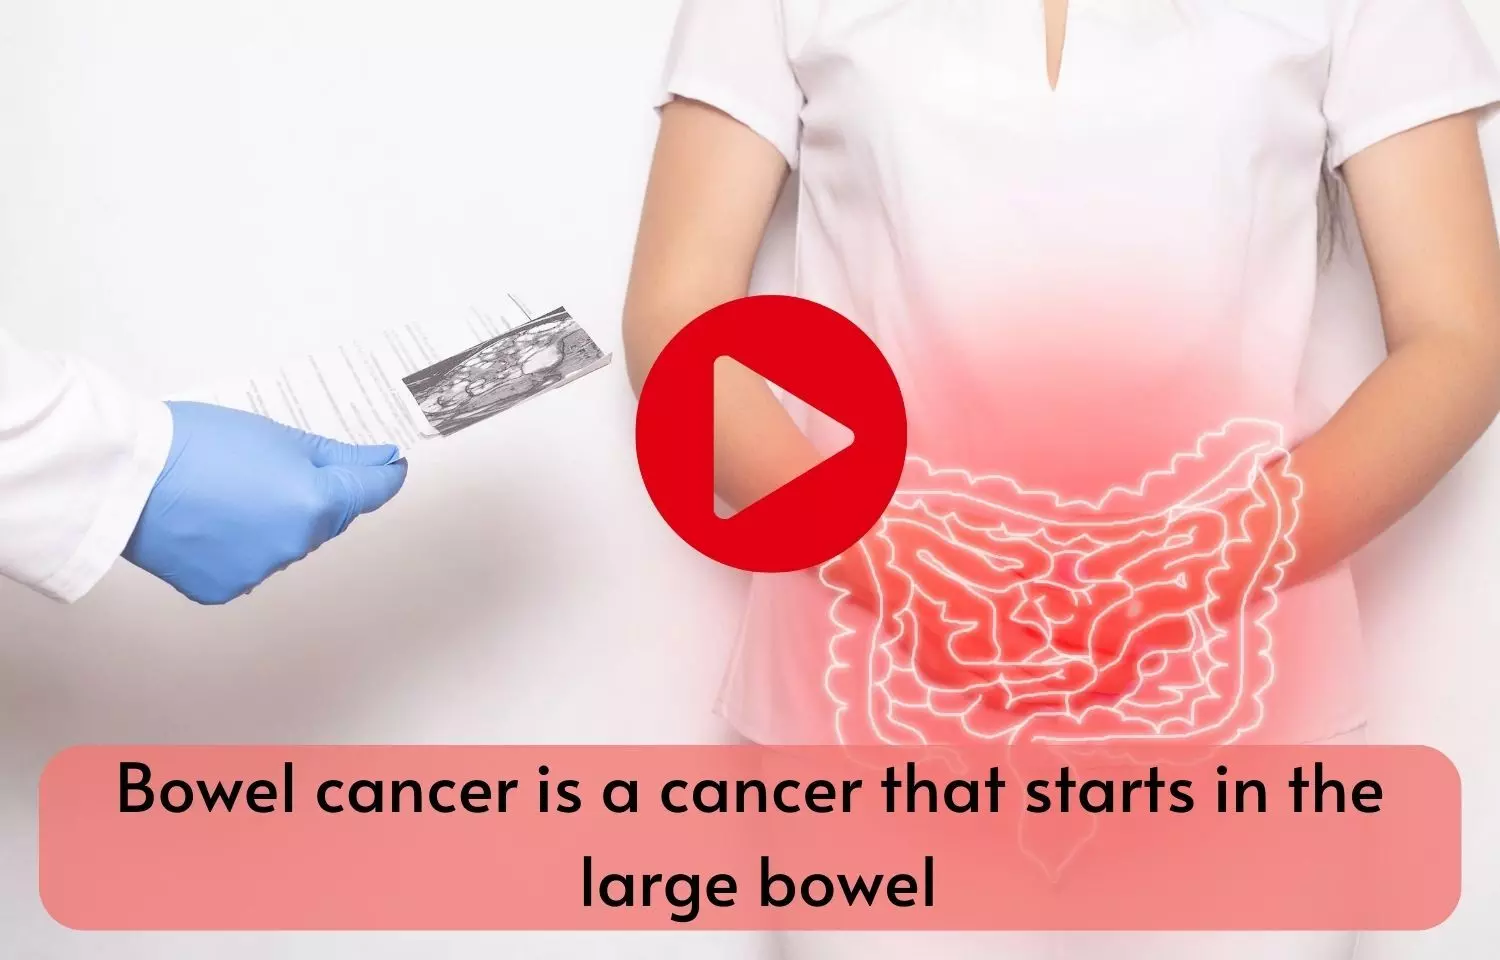 Bowel cancer is a cancer that starts in the large bowel